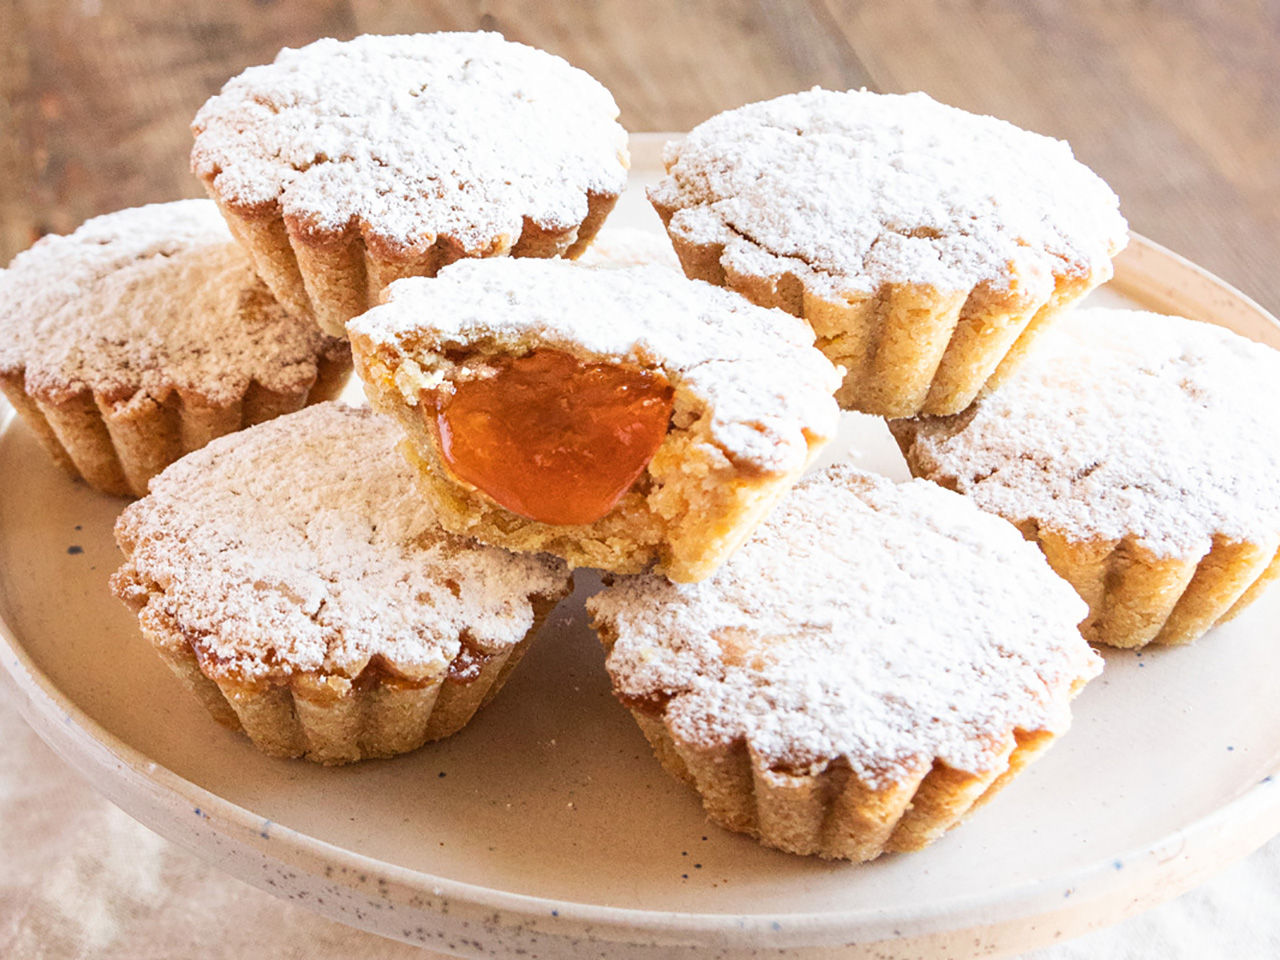 gobeletti biscuits whit apricot spread